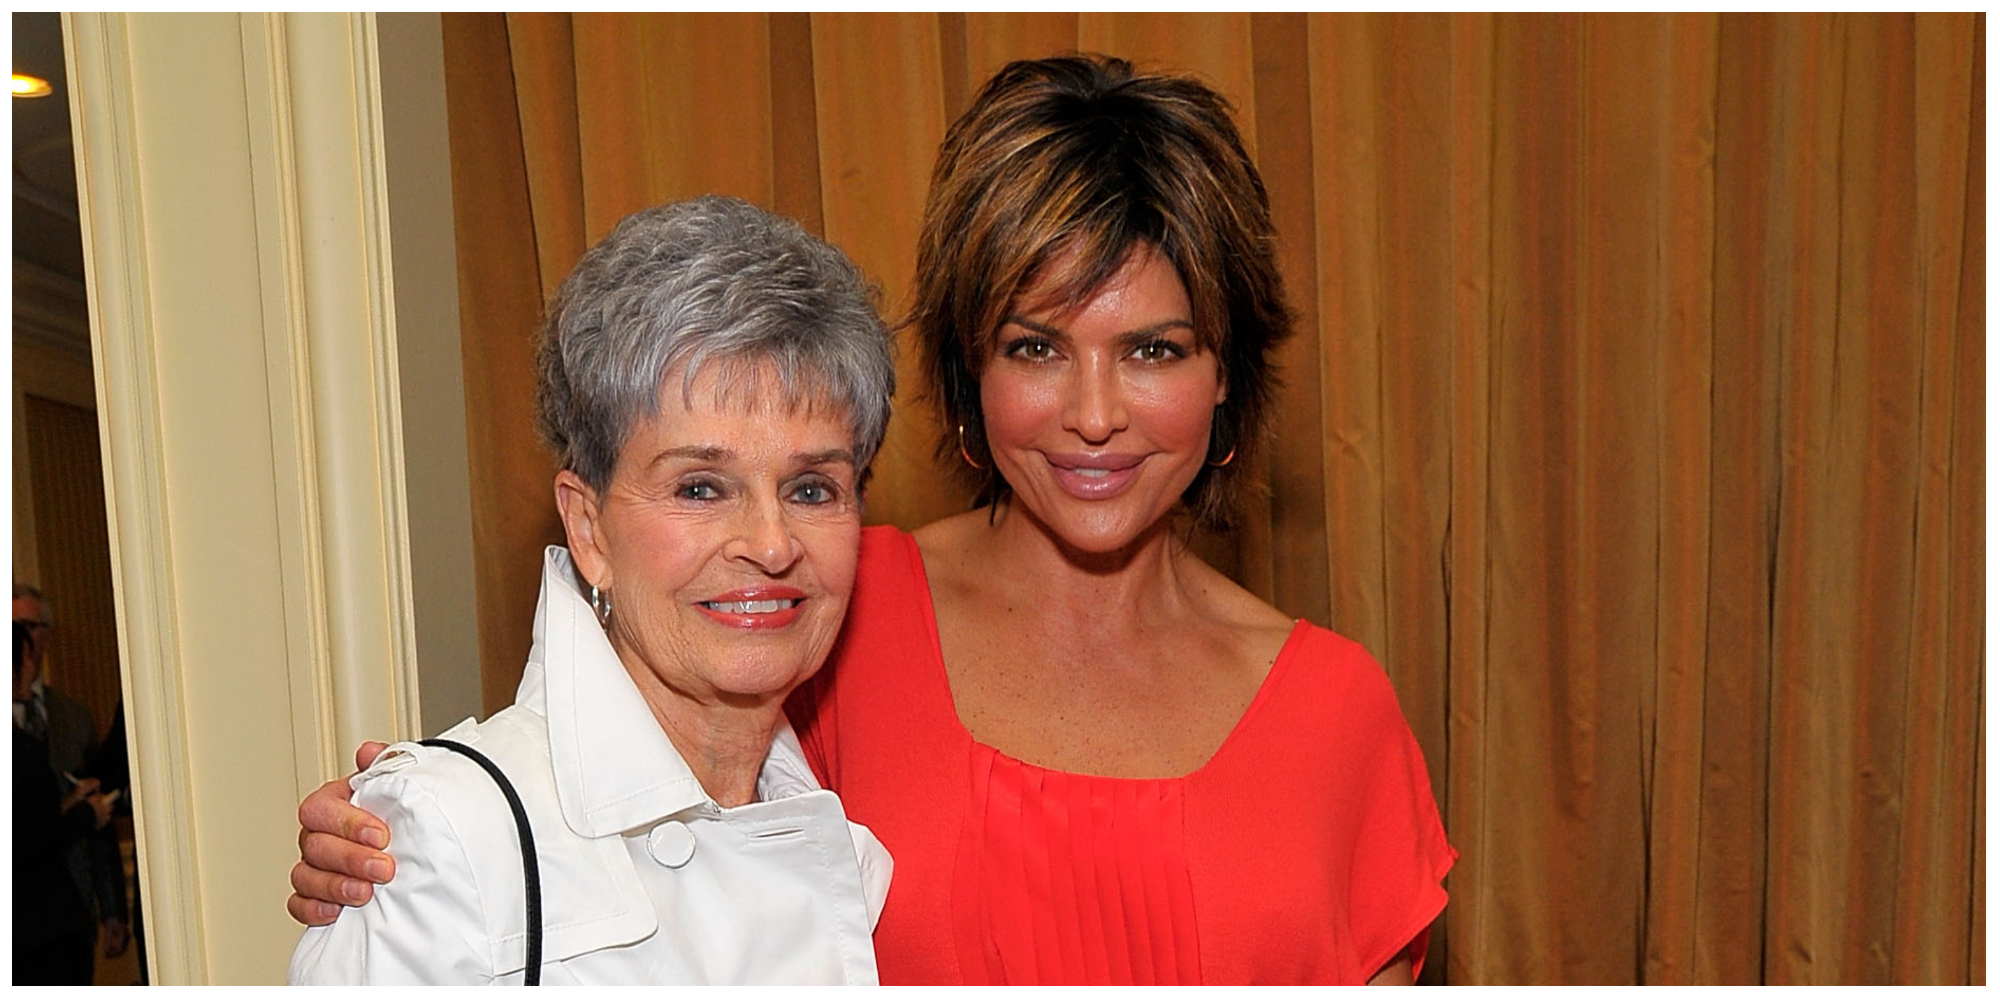 Lois and Lisa Rinna attended an event together. Lisa posed with her arm around her mother's shoulder.